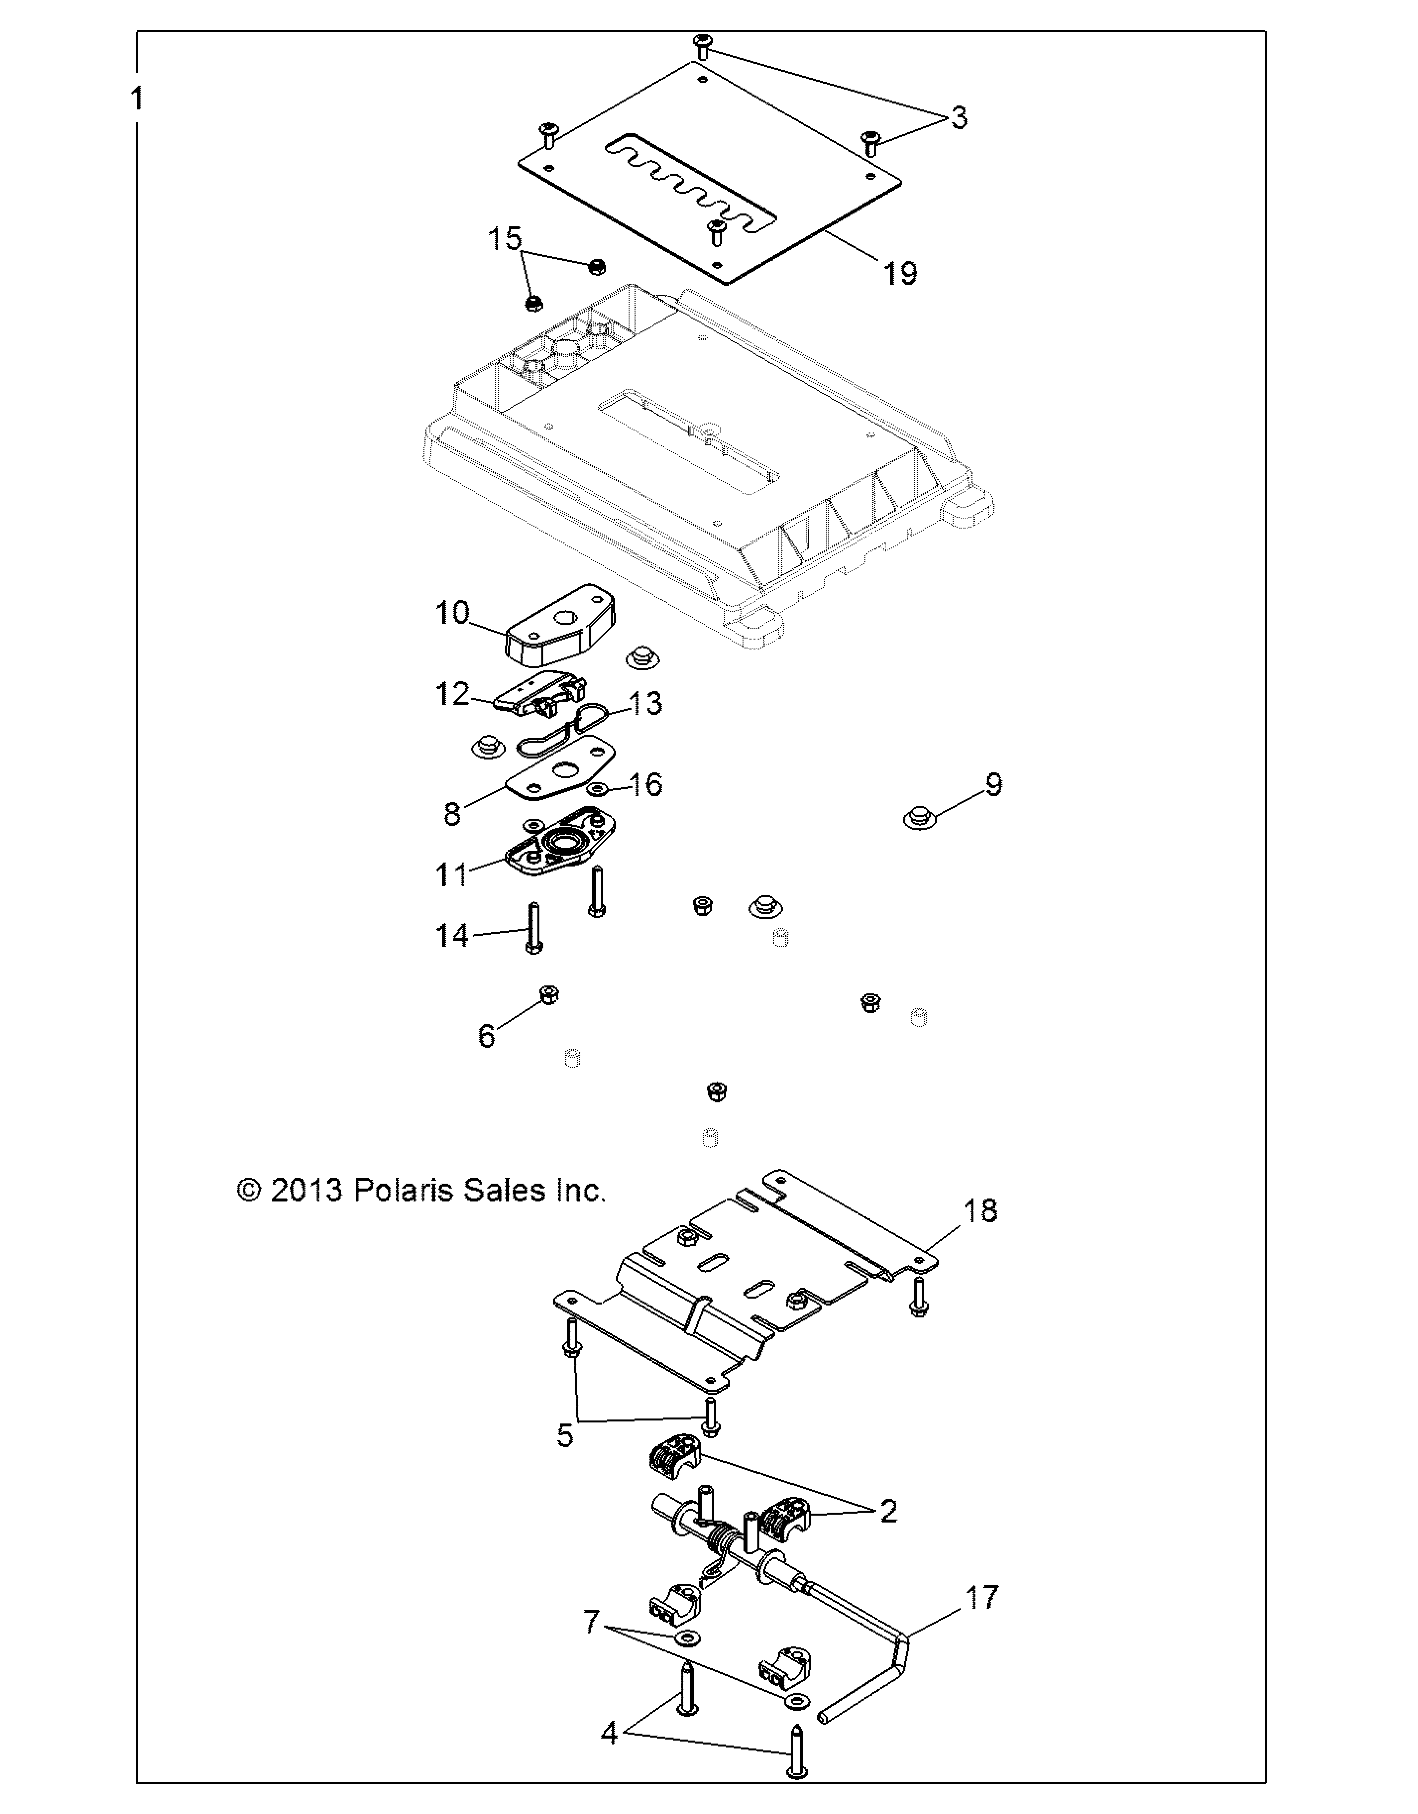 Part Number : 1019827 WELD-BOTTOM PLATE